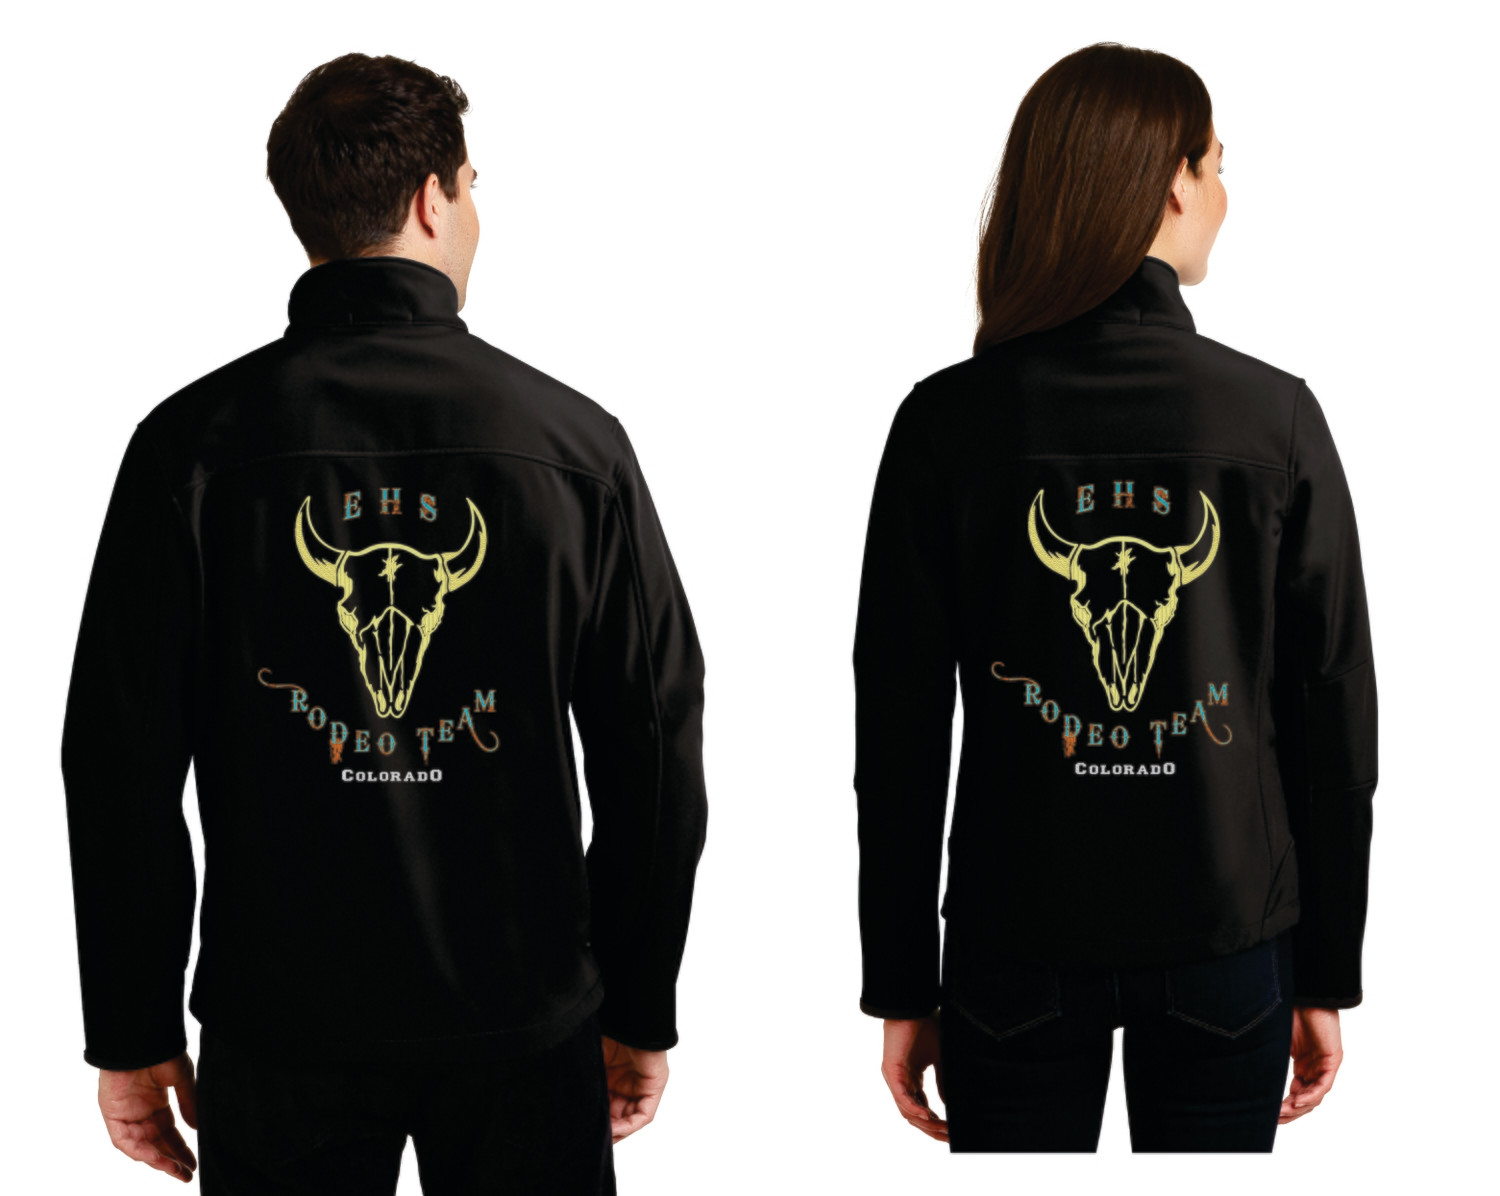 EHS Rodeo Non-Competitor Jackets - Ladies and Mens